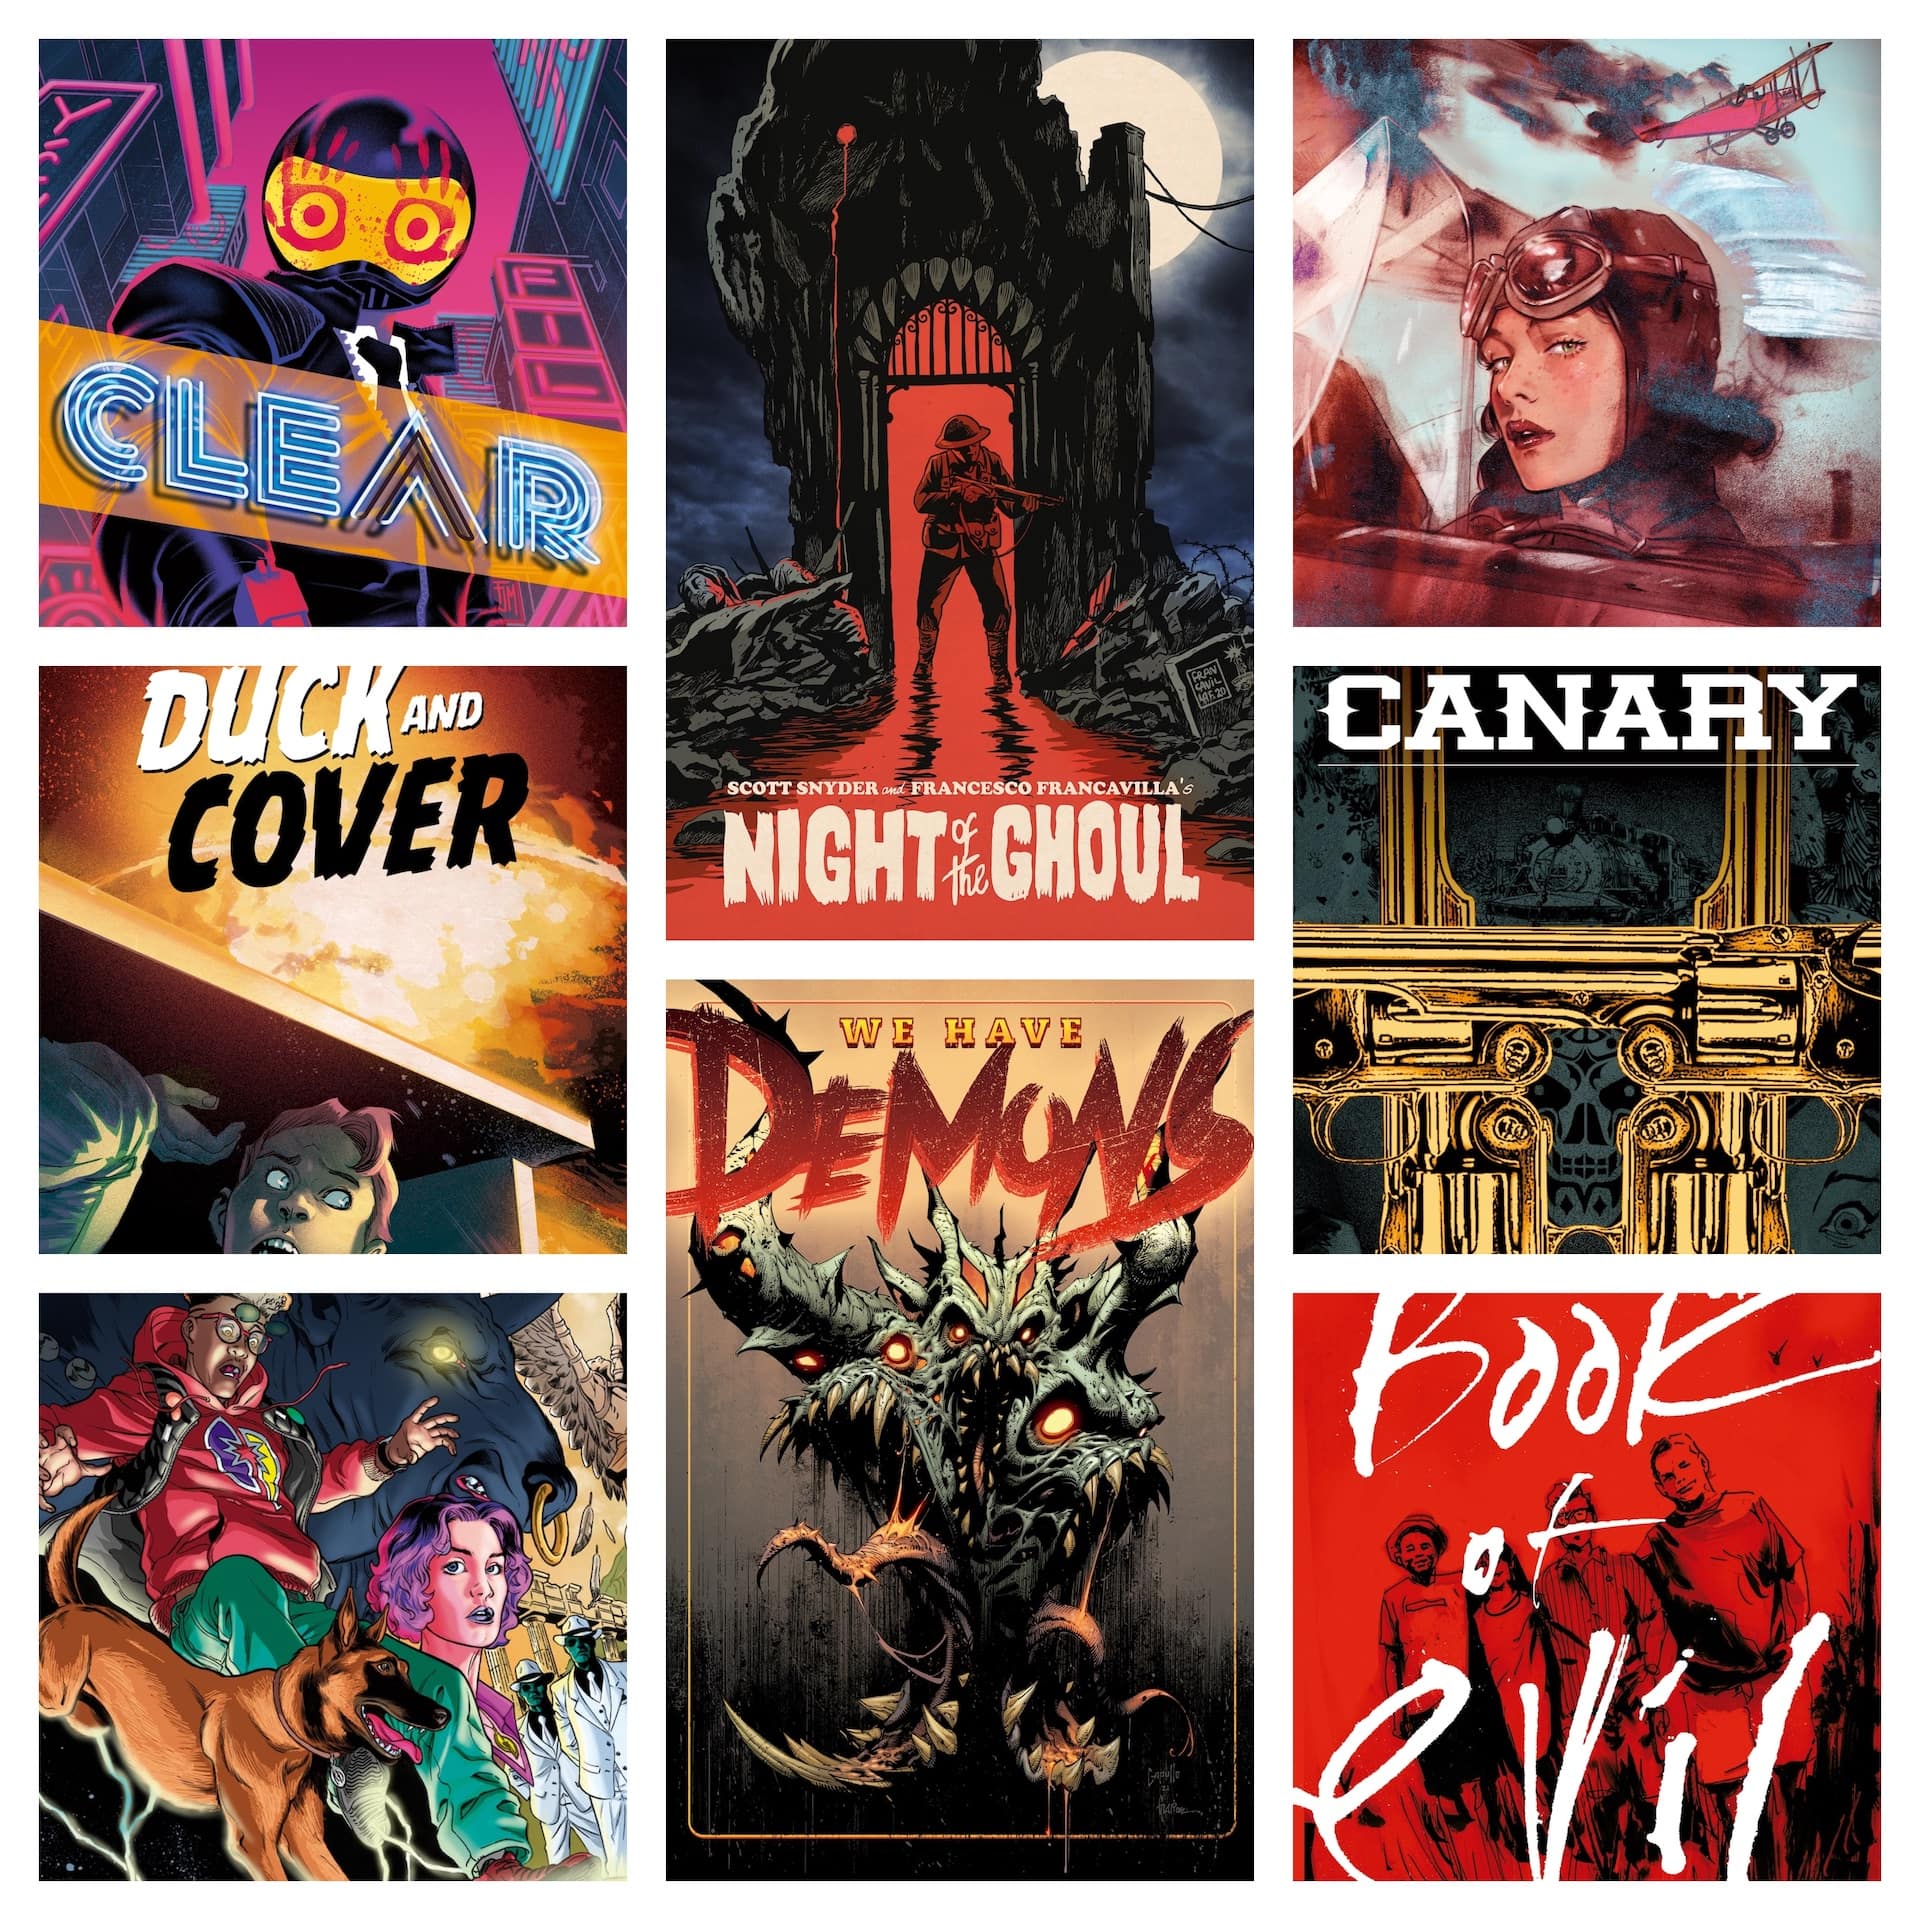 Pairing digital and physical: Scott Snyder on his eight title launch at ComiXology